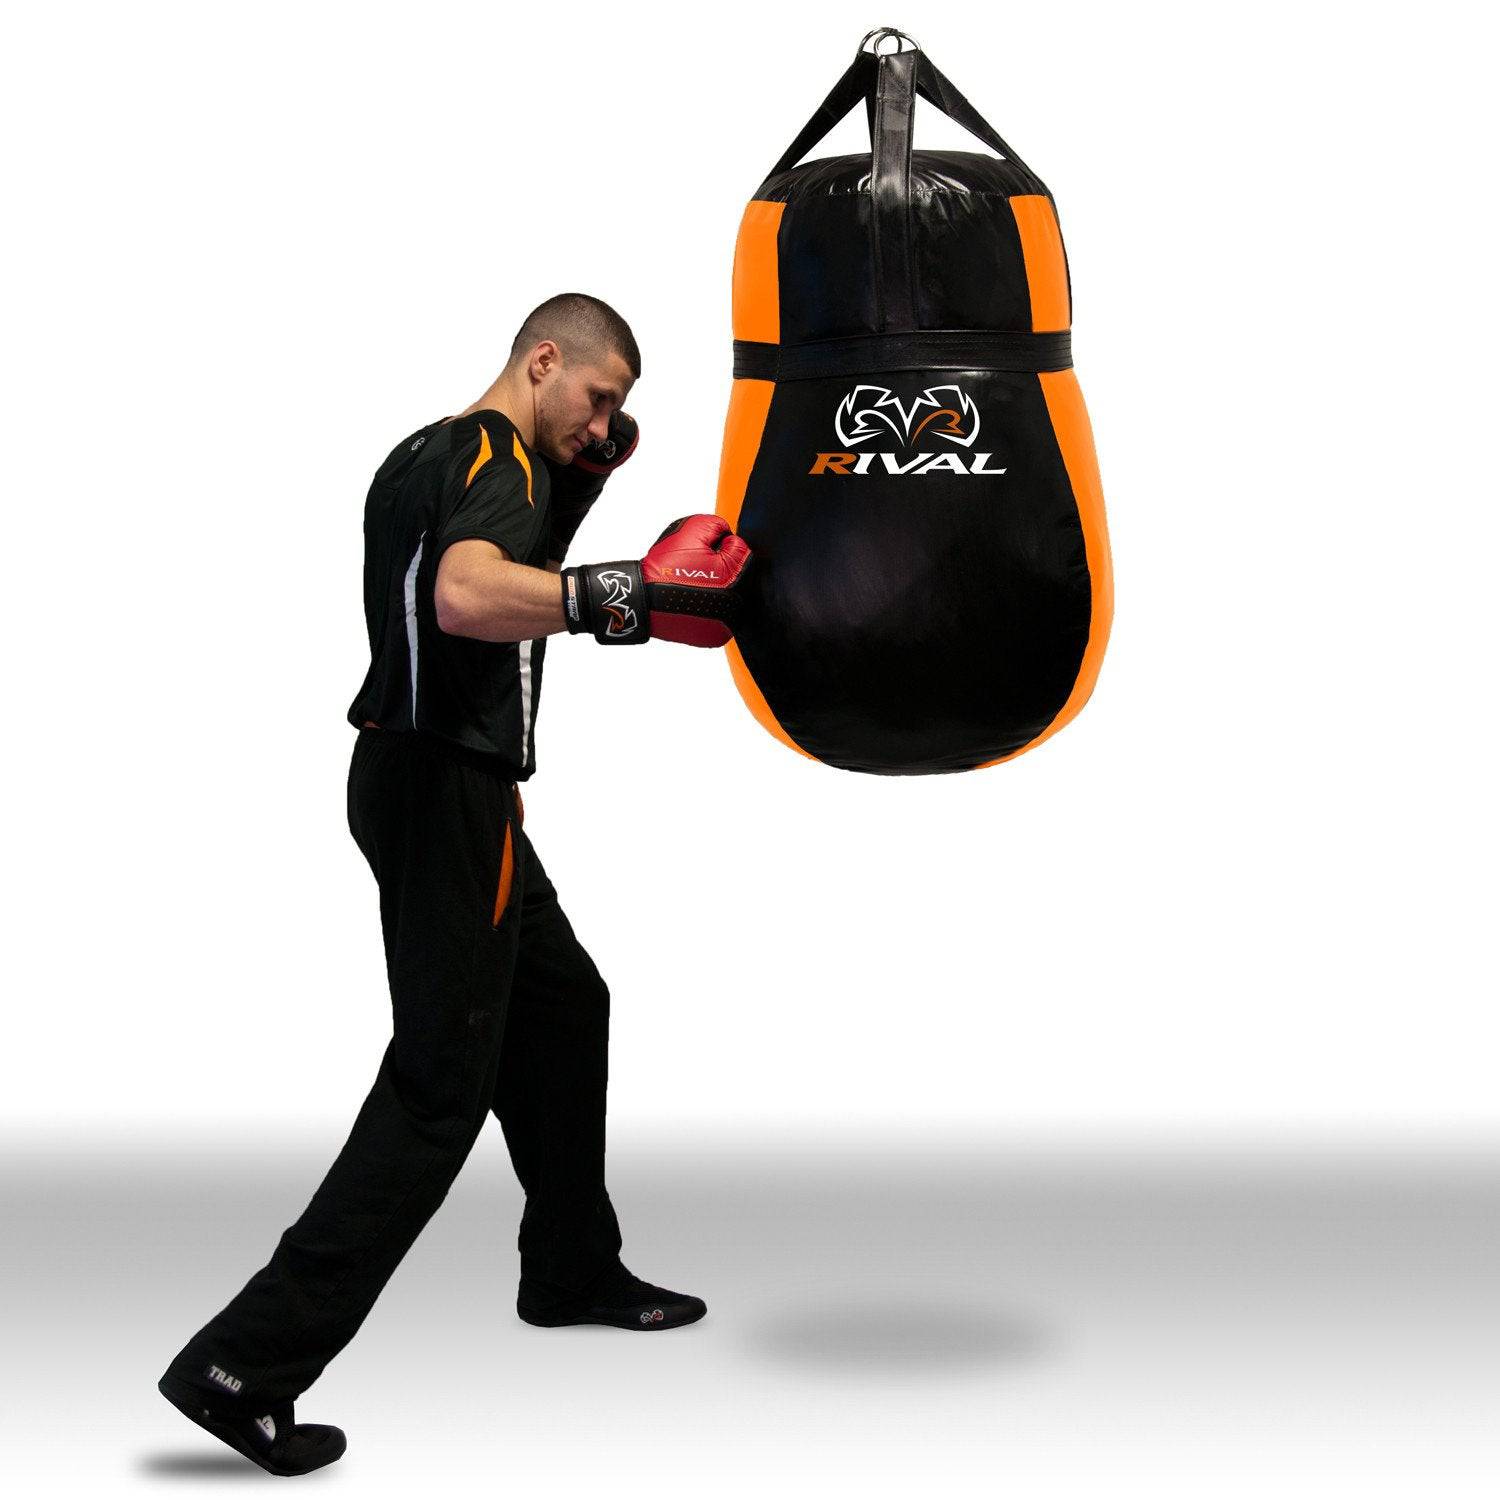 Rival | Heavy Bag - Universal - XTC Fitness - Exercise Equipment Superstore - Canada - Heavy Bag